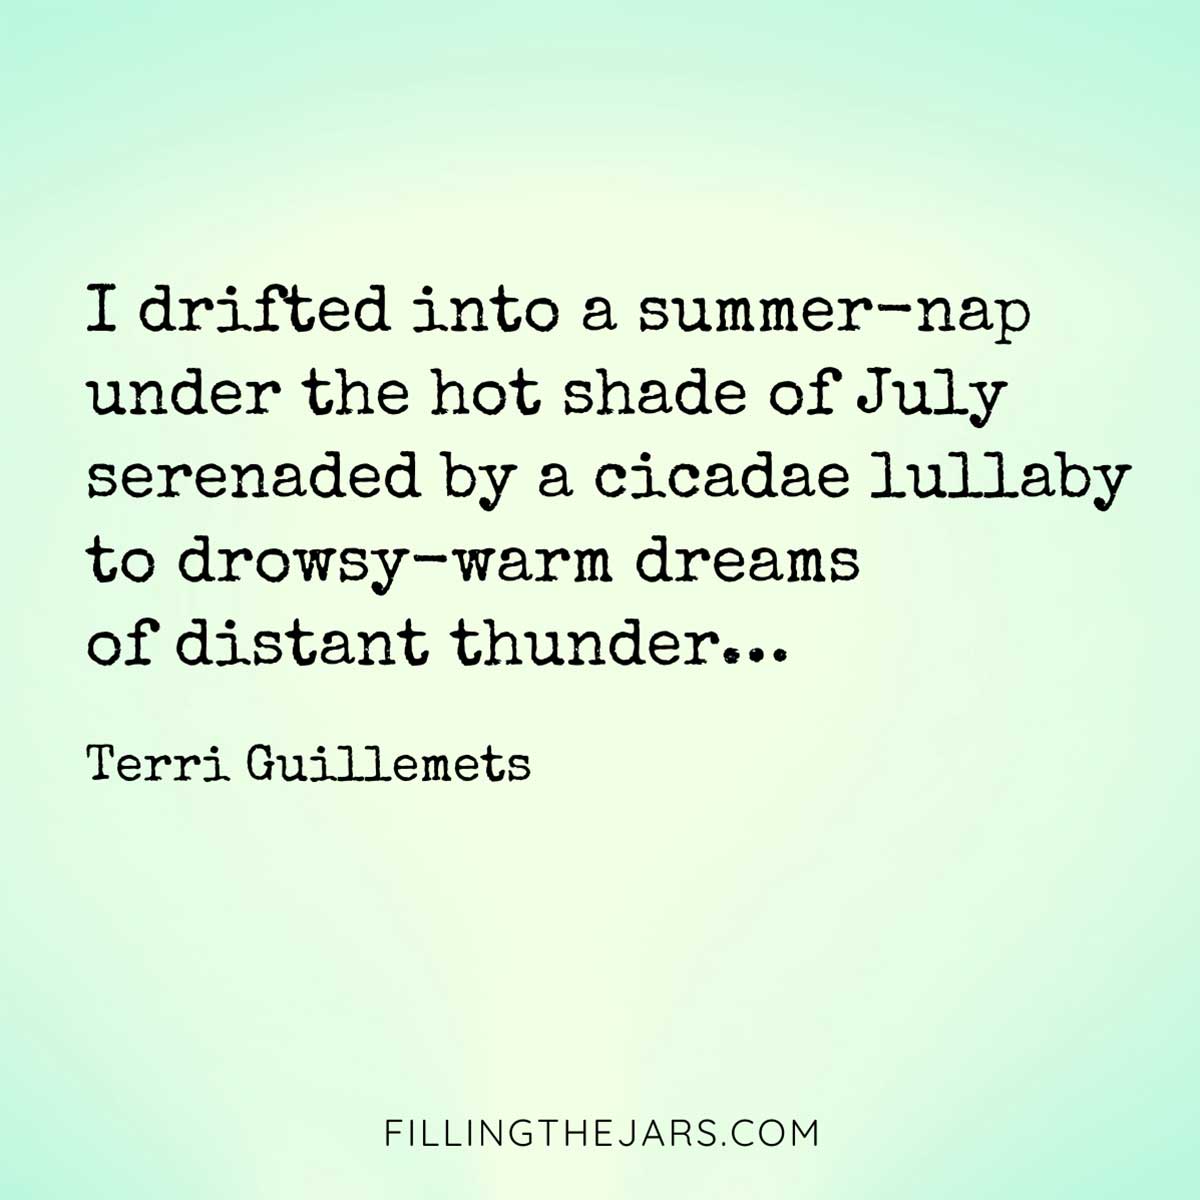 Terri Guillemets summer-nap under the hot shade of July poem quote in black text on green and cream mottled background.